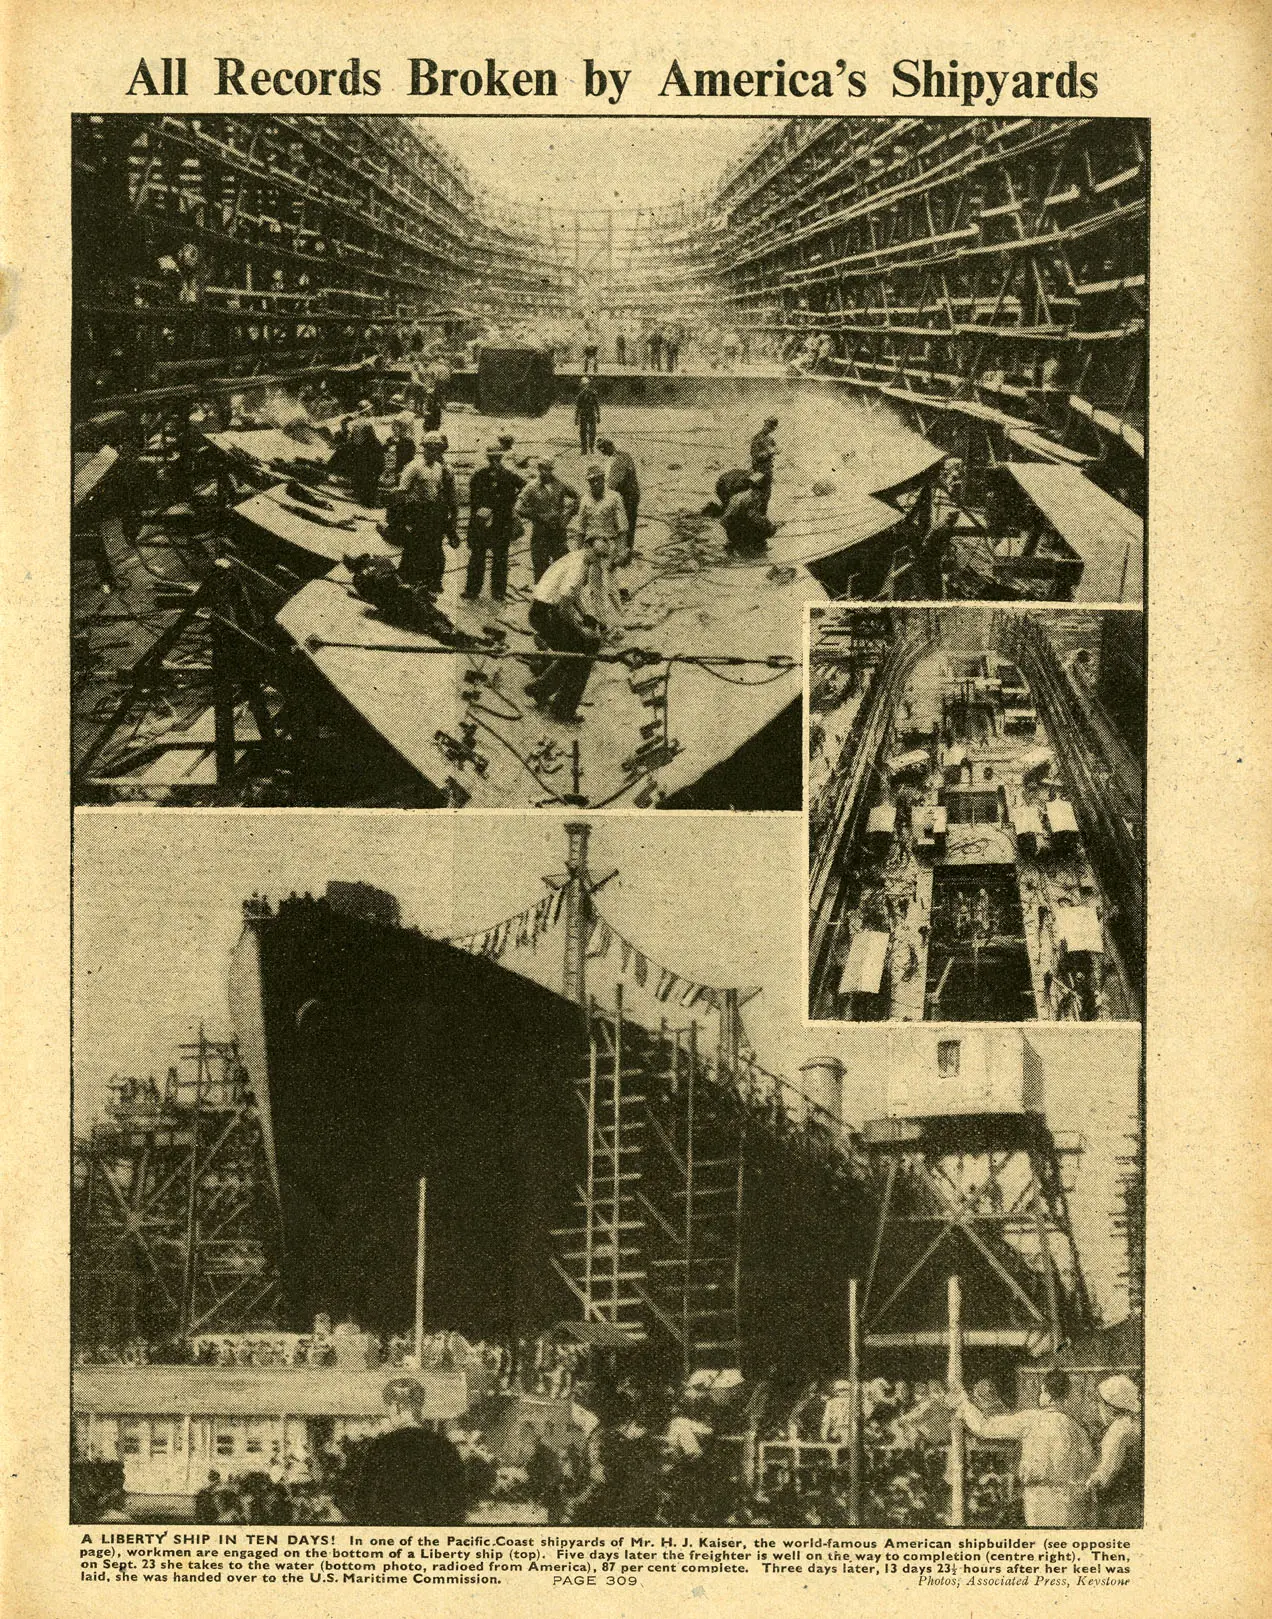 A page of The War Illustrated showing pictures of American shipyards. The first picture is taken near the dry dock floor, with the very bottom of a ship already laid out and dozens of workers standing on it. The next photo shows an aerial view of a ship about halfway constructed. The final photo shows the completed hull of a ship ready for launching.